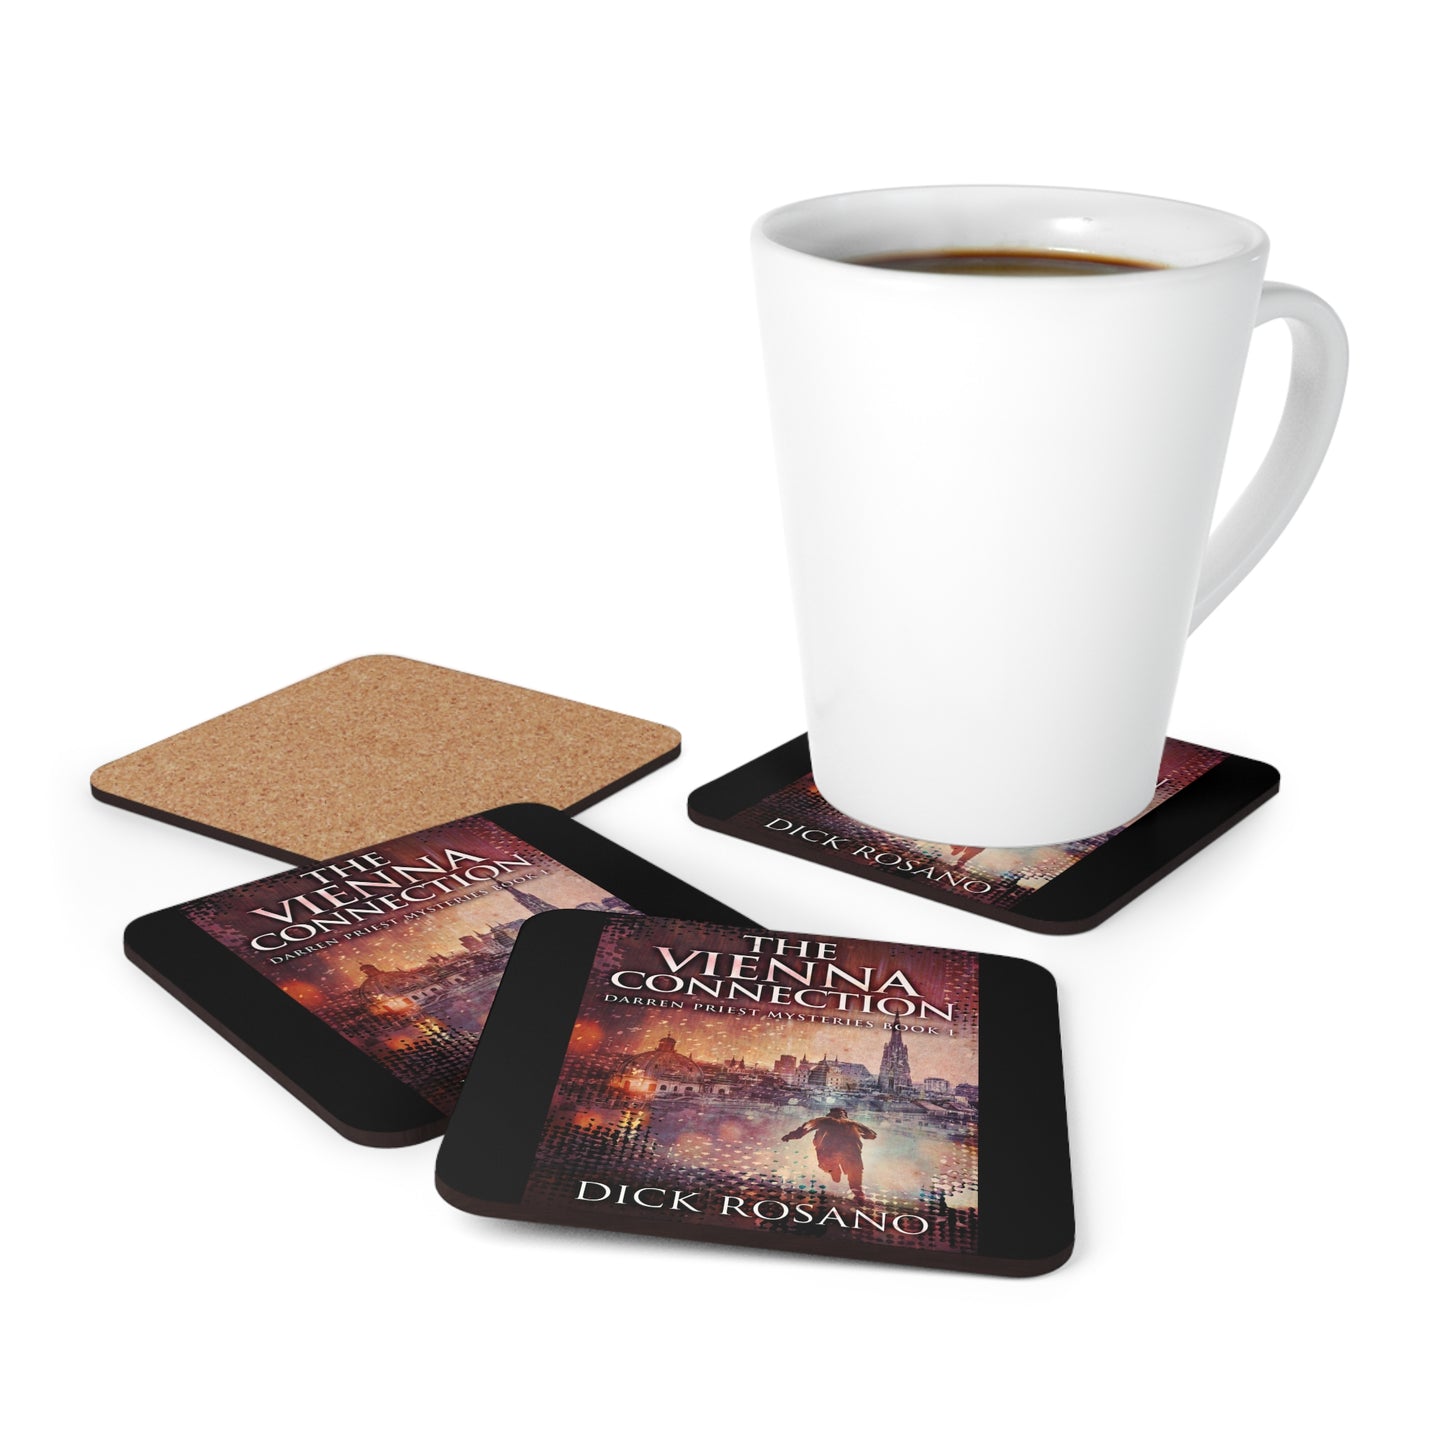 The Vienna Connection - Corkwood Coaster Set